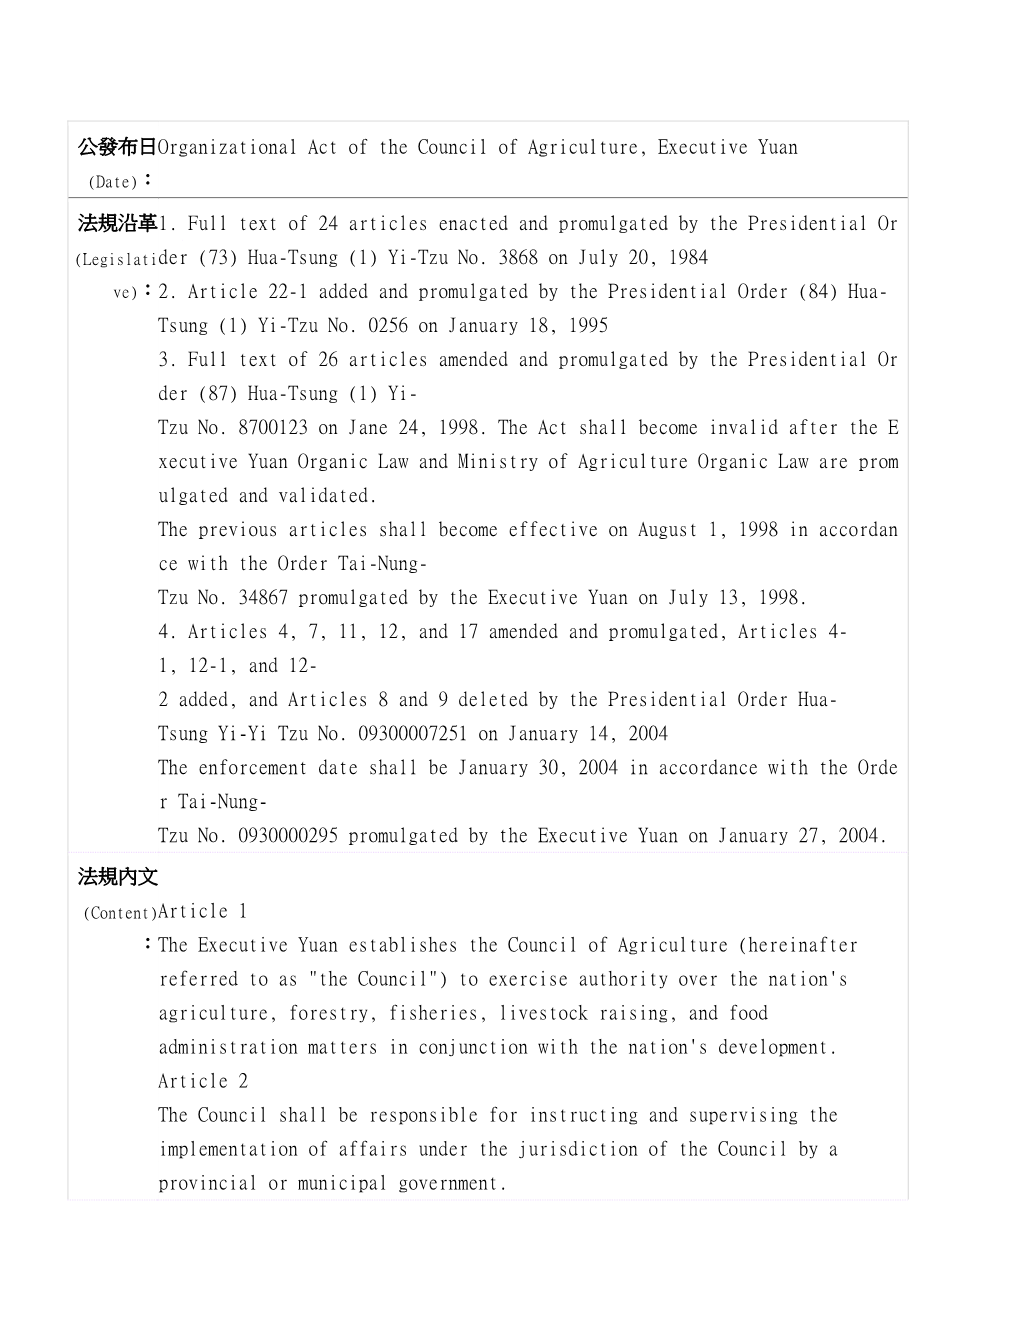 Organizational Act of the Council of Agriculture, Executive Yuan (Date)：